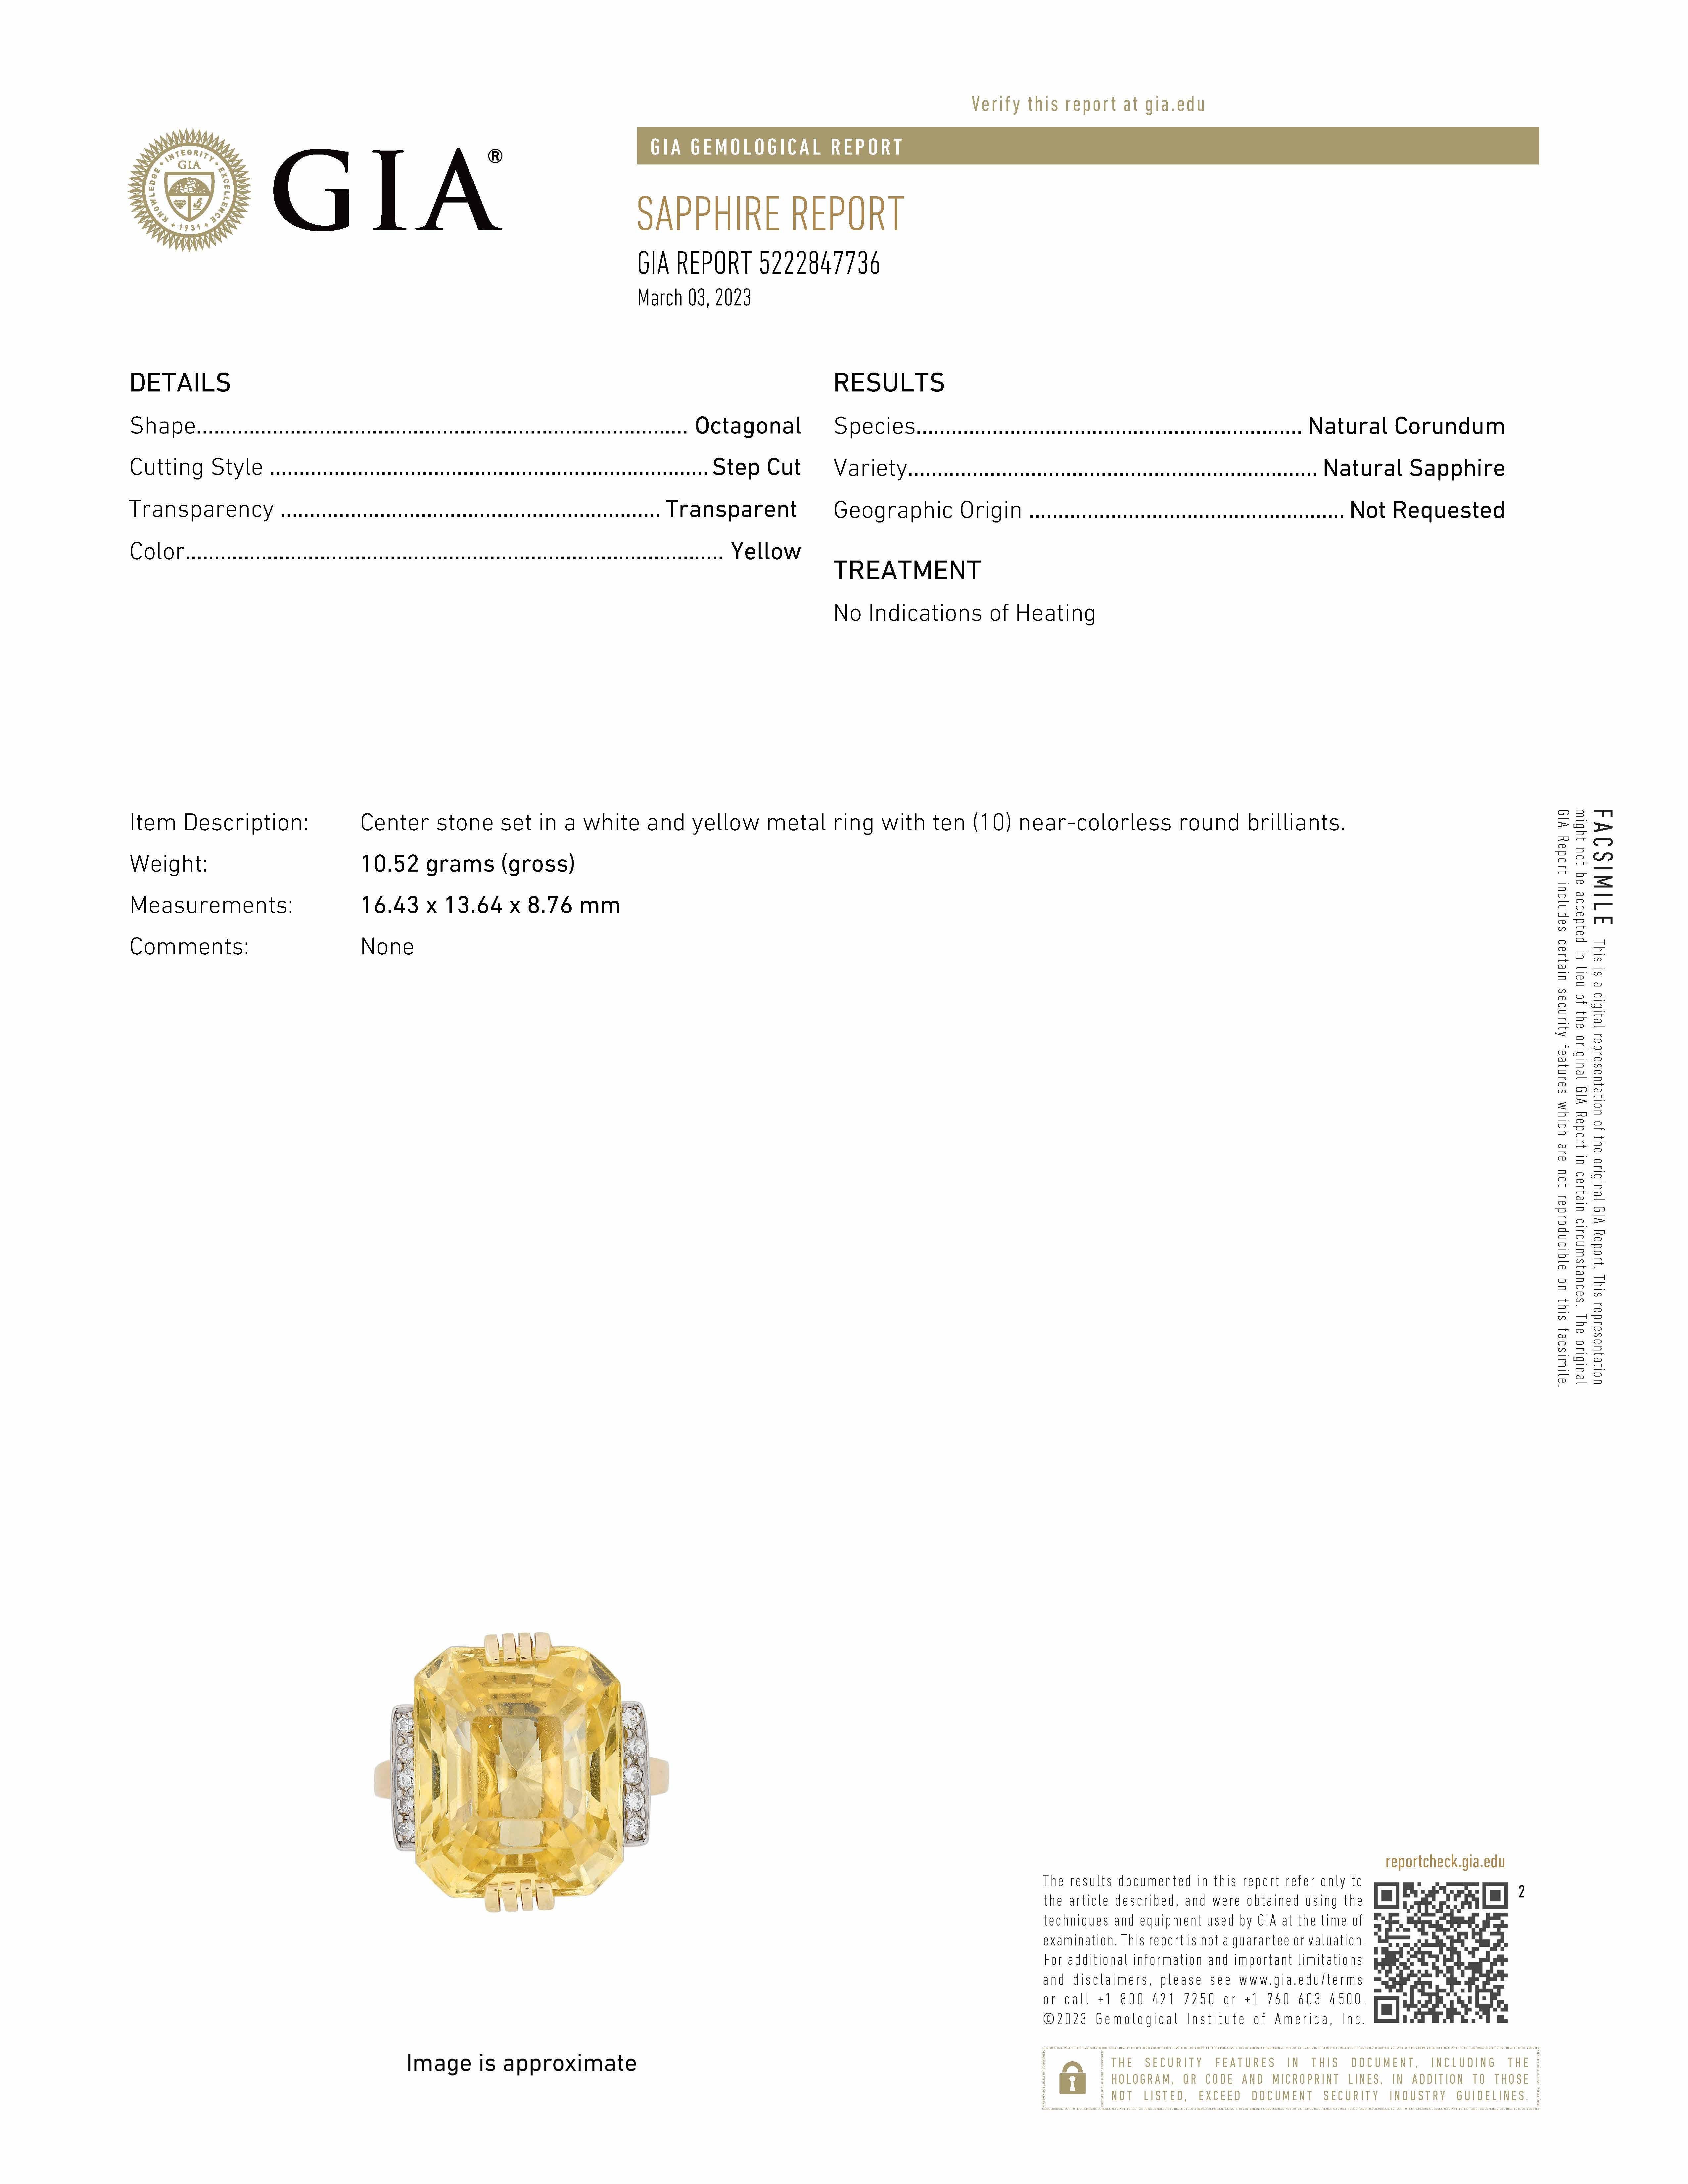 Retro cocktail ring, centering a fine 19.77 carat natural yellow sapphire measuring 16.43 x 13.64 x 8.76mm.  Ten round-cut diamonds accent the sides of the yellow gold mounting weighing approximately 0.10 total carats.  Accompanied by the GIA report